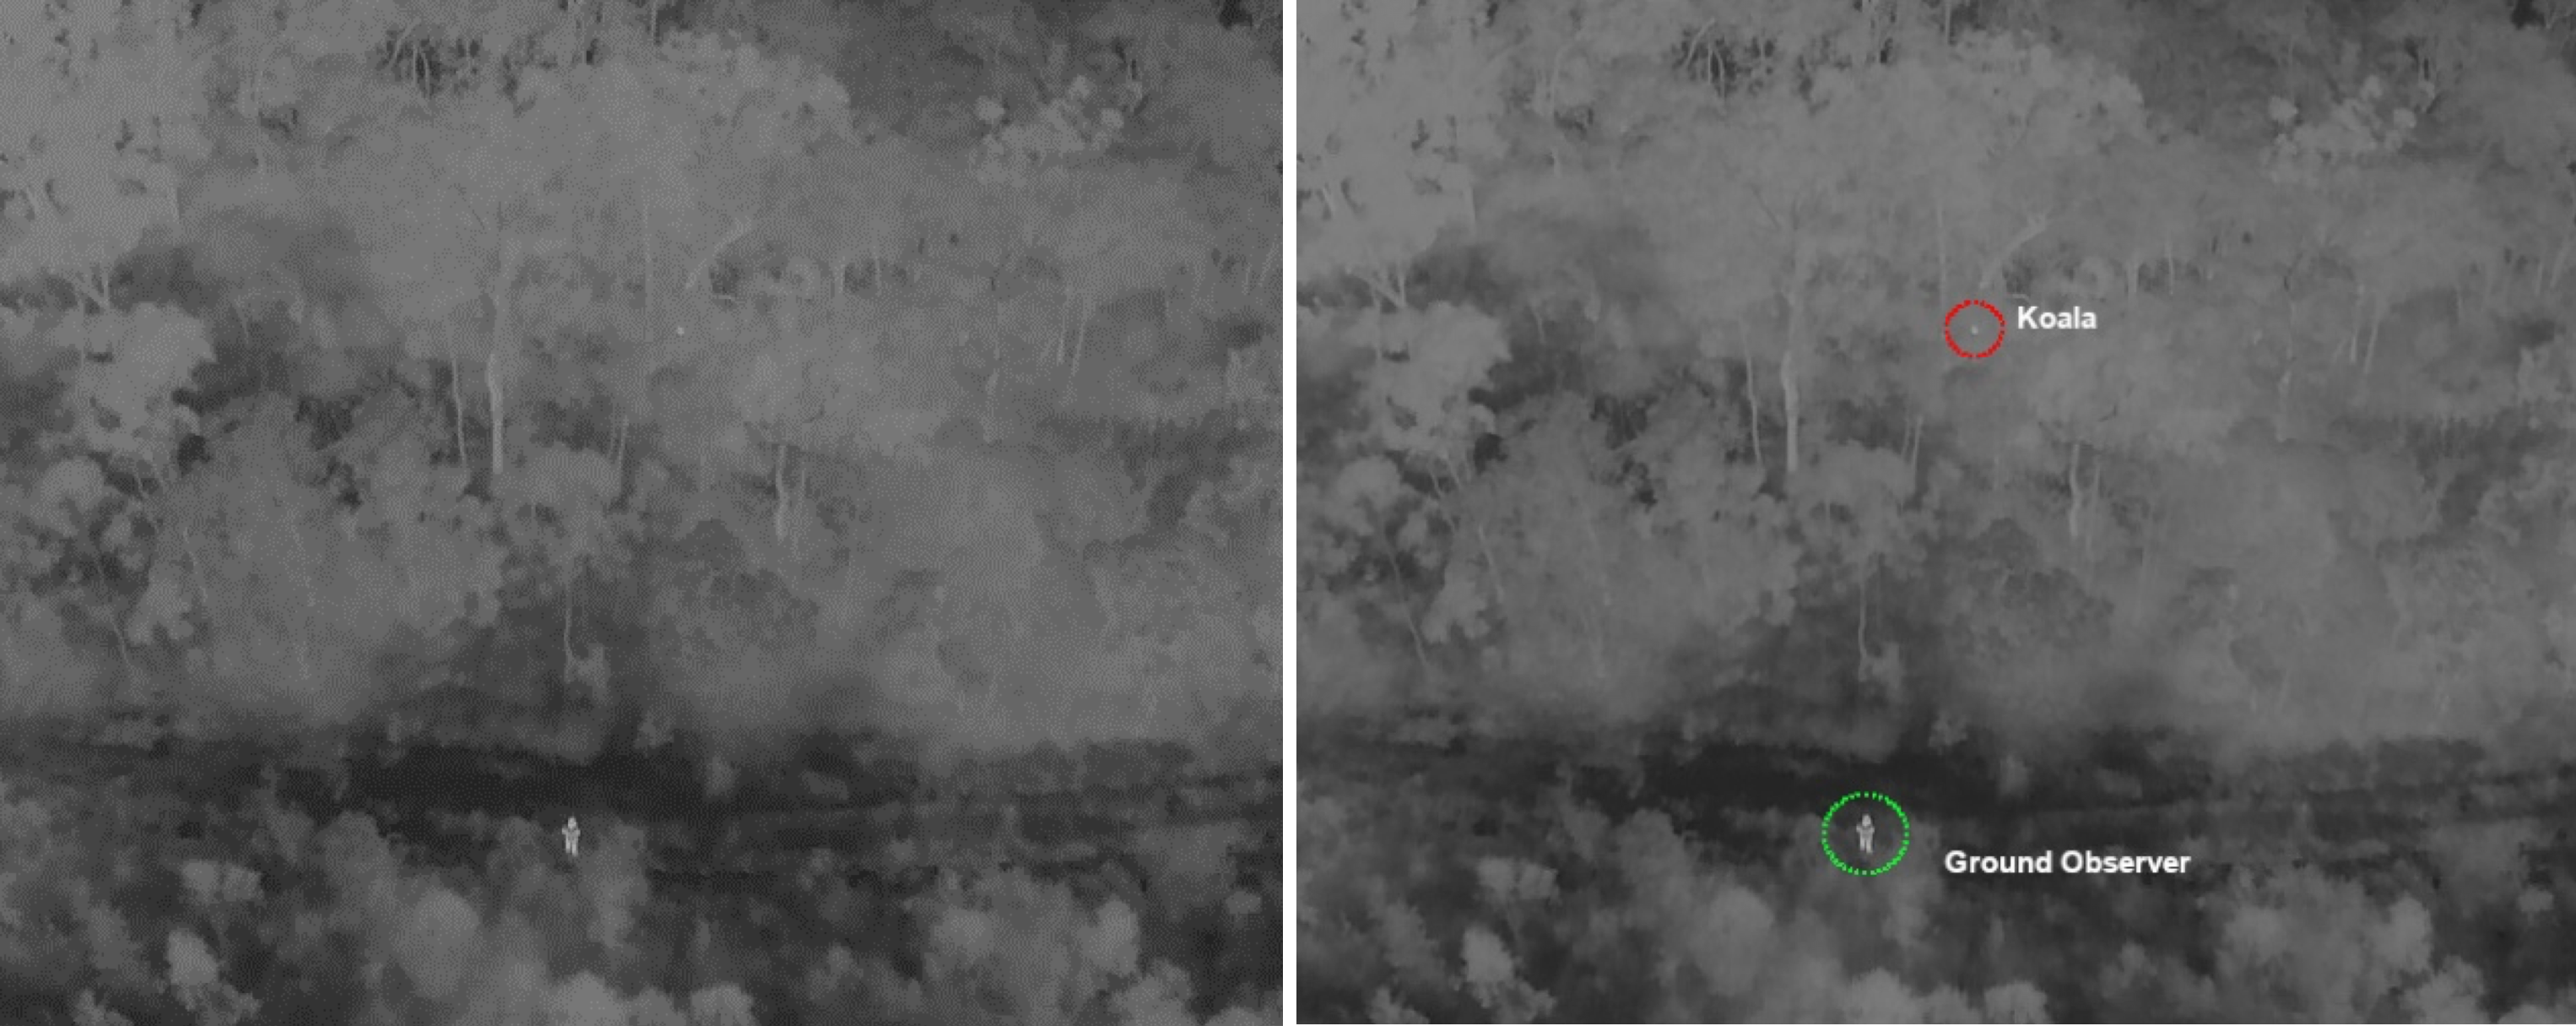 Twin thermal photos, the first a straight thermal image, the second the same image with the koala and ground observer highlighted.